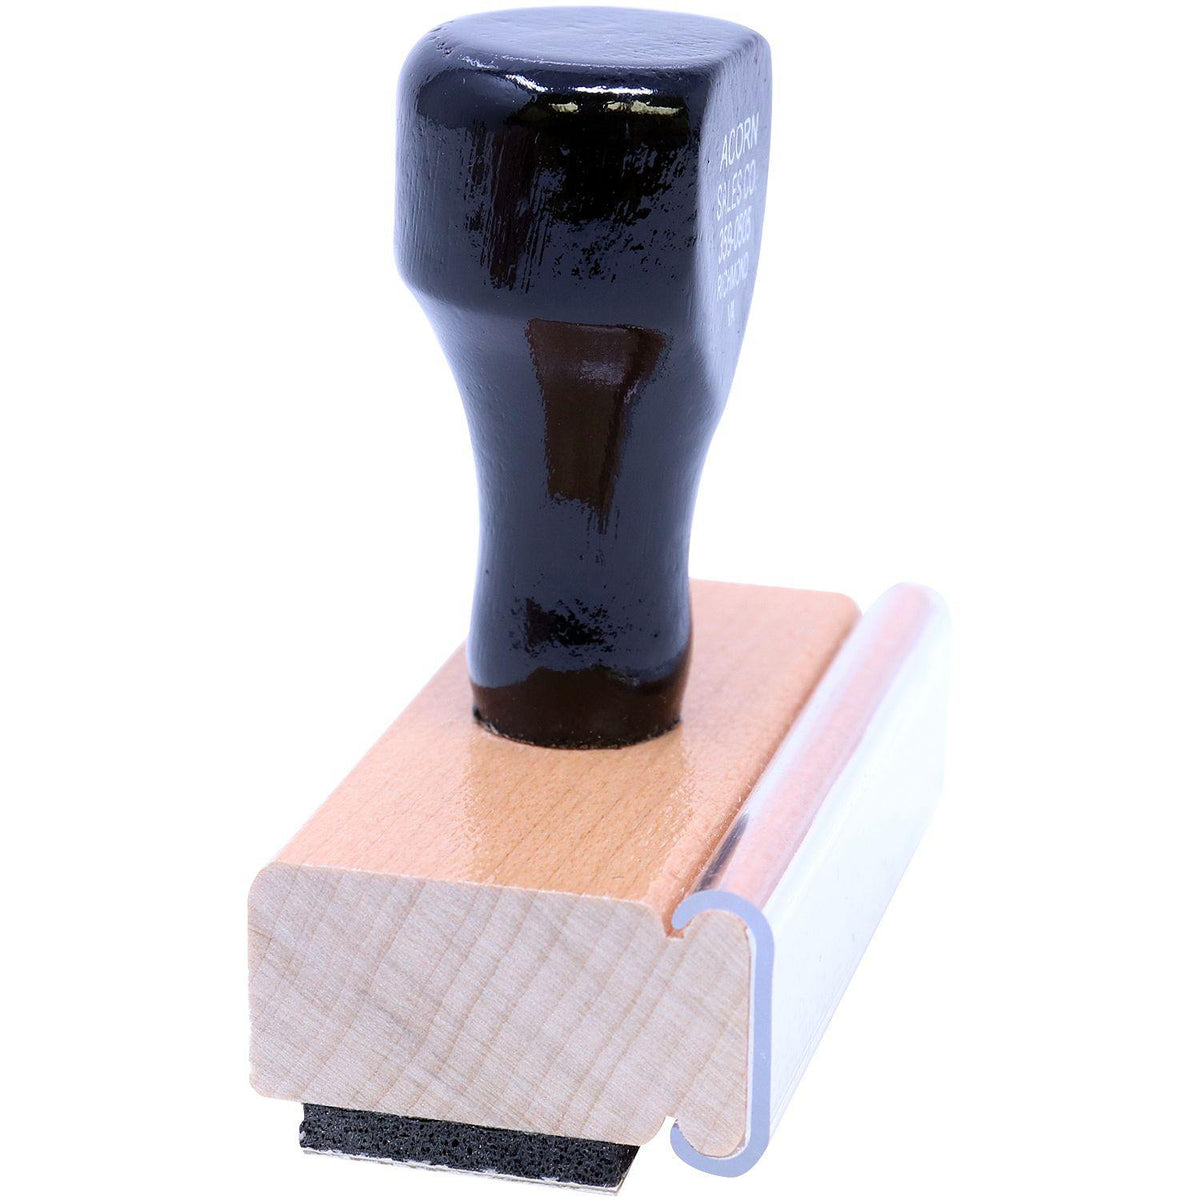 Side View of Super Rubber Stamp at an Angle